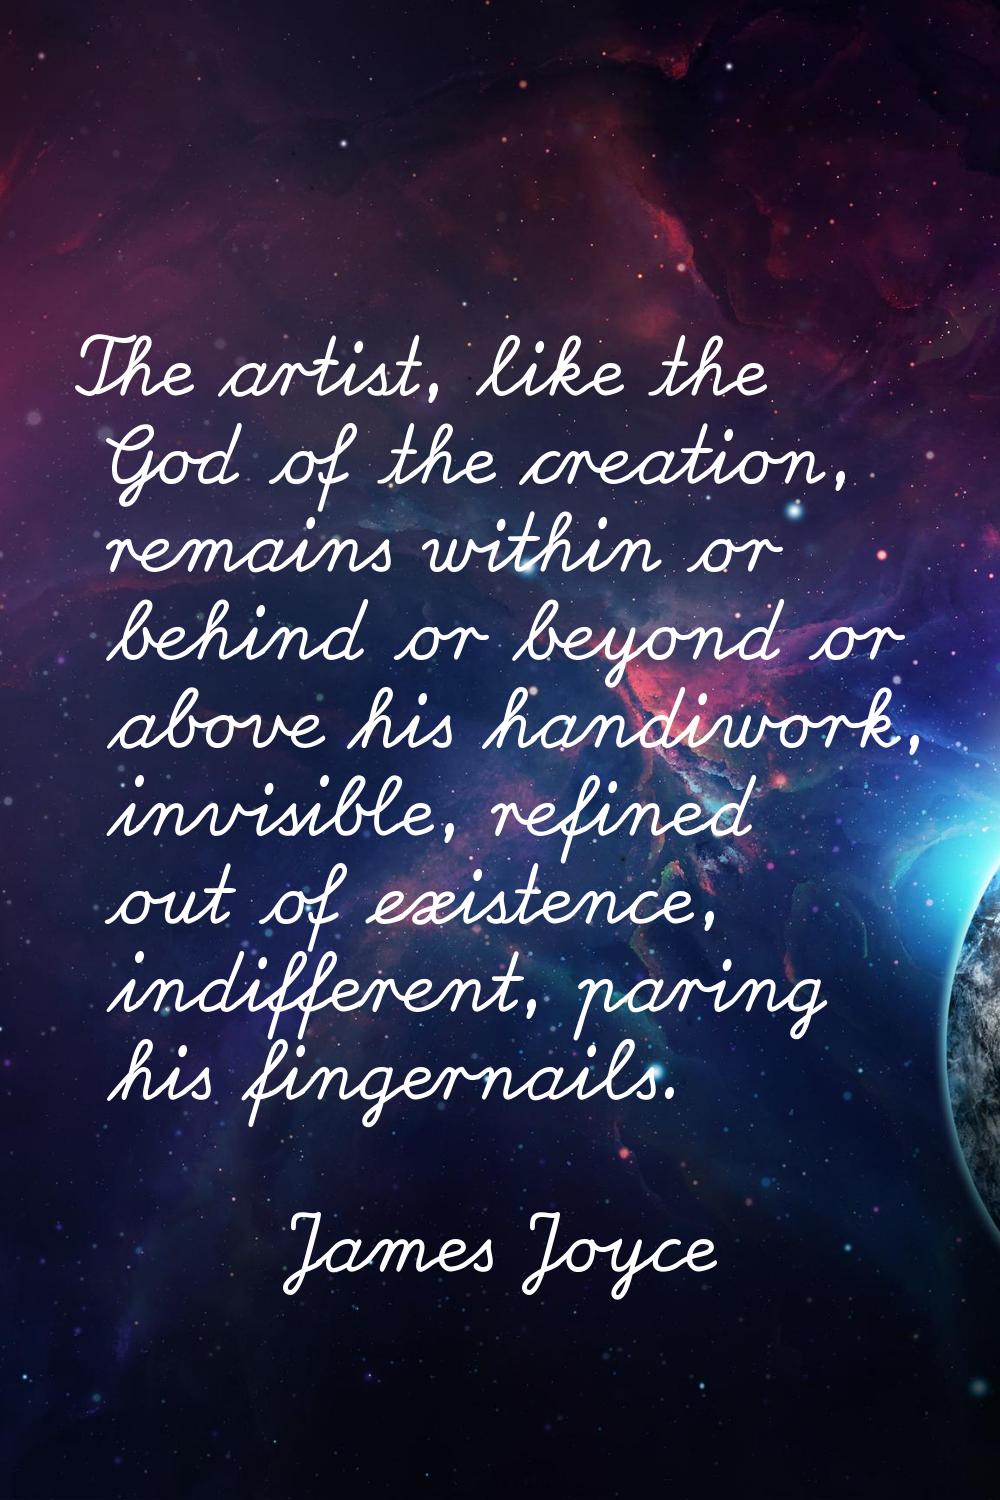 The artist, like the God of the creation, remains within or behind or beyond or above his handiwork